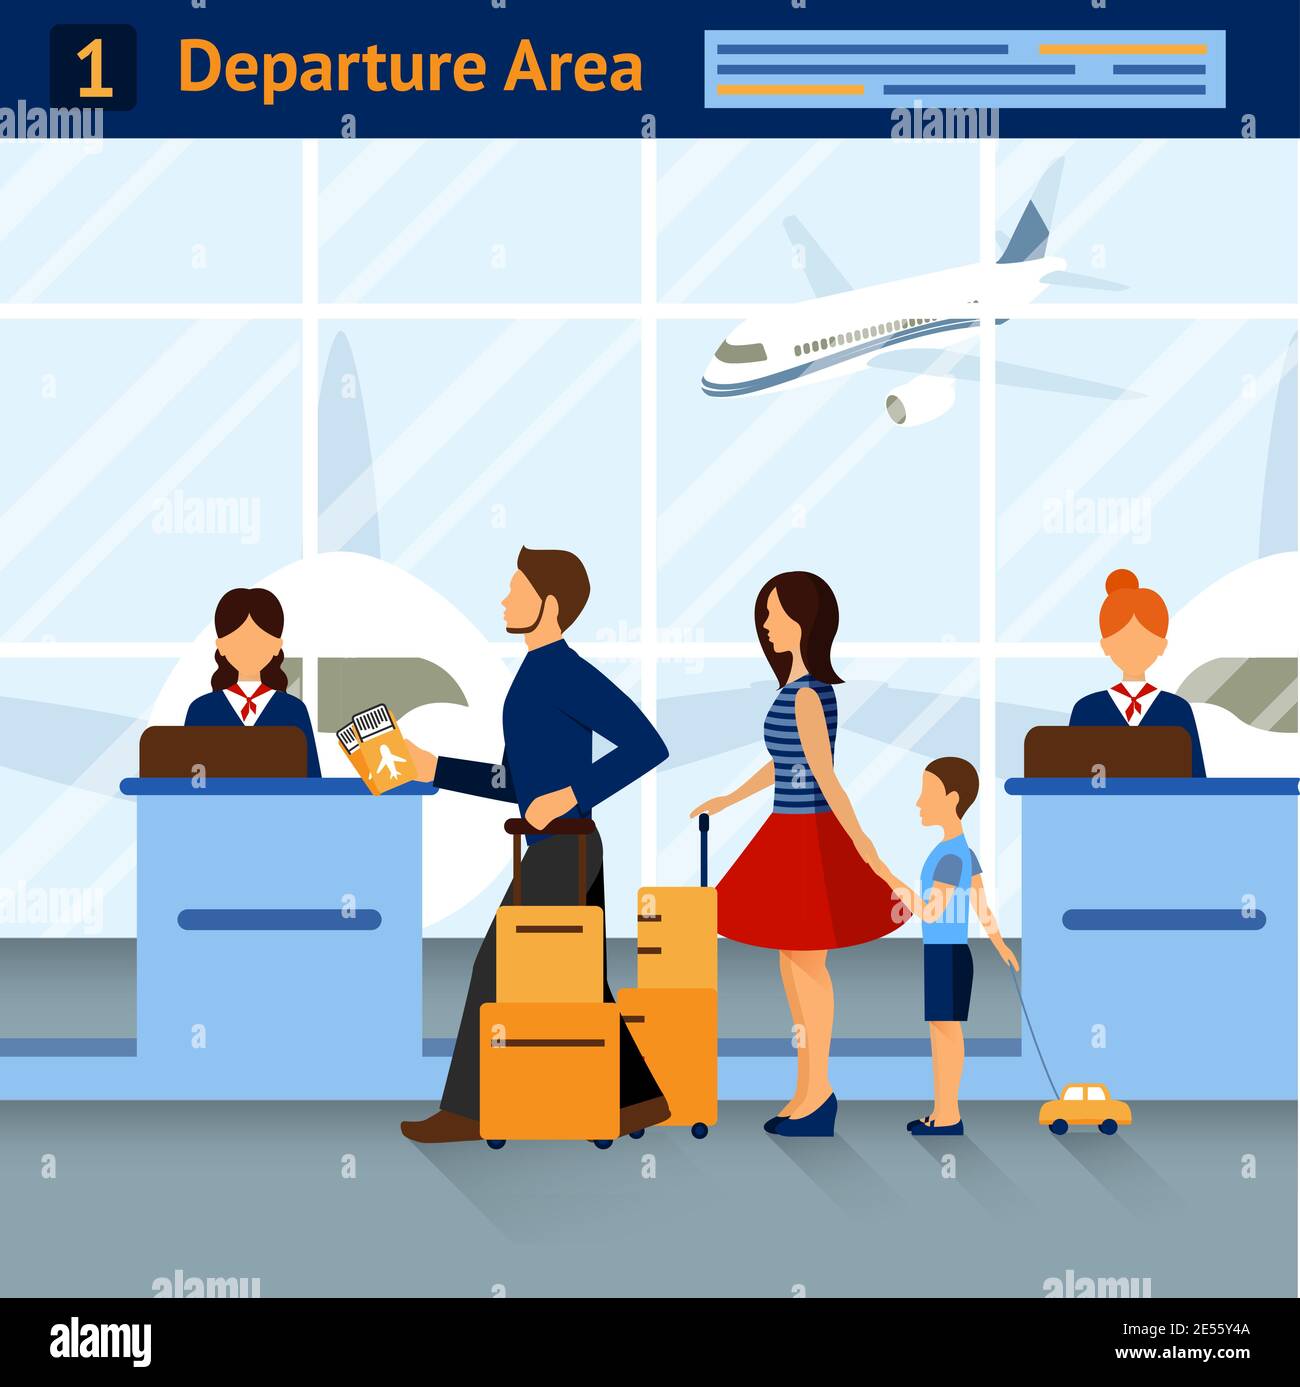 Scene airport departure area with passengers reception and airplanes on background with title on top vector illustration Stock Vector